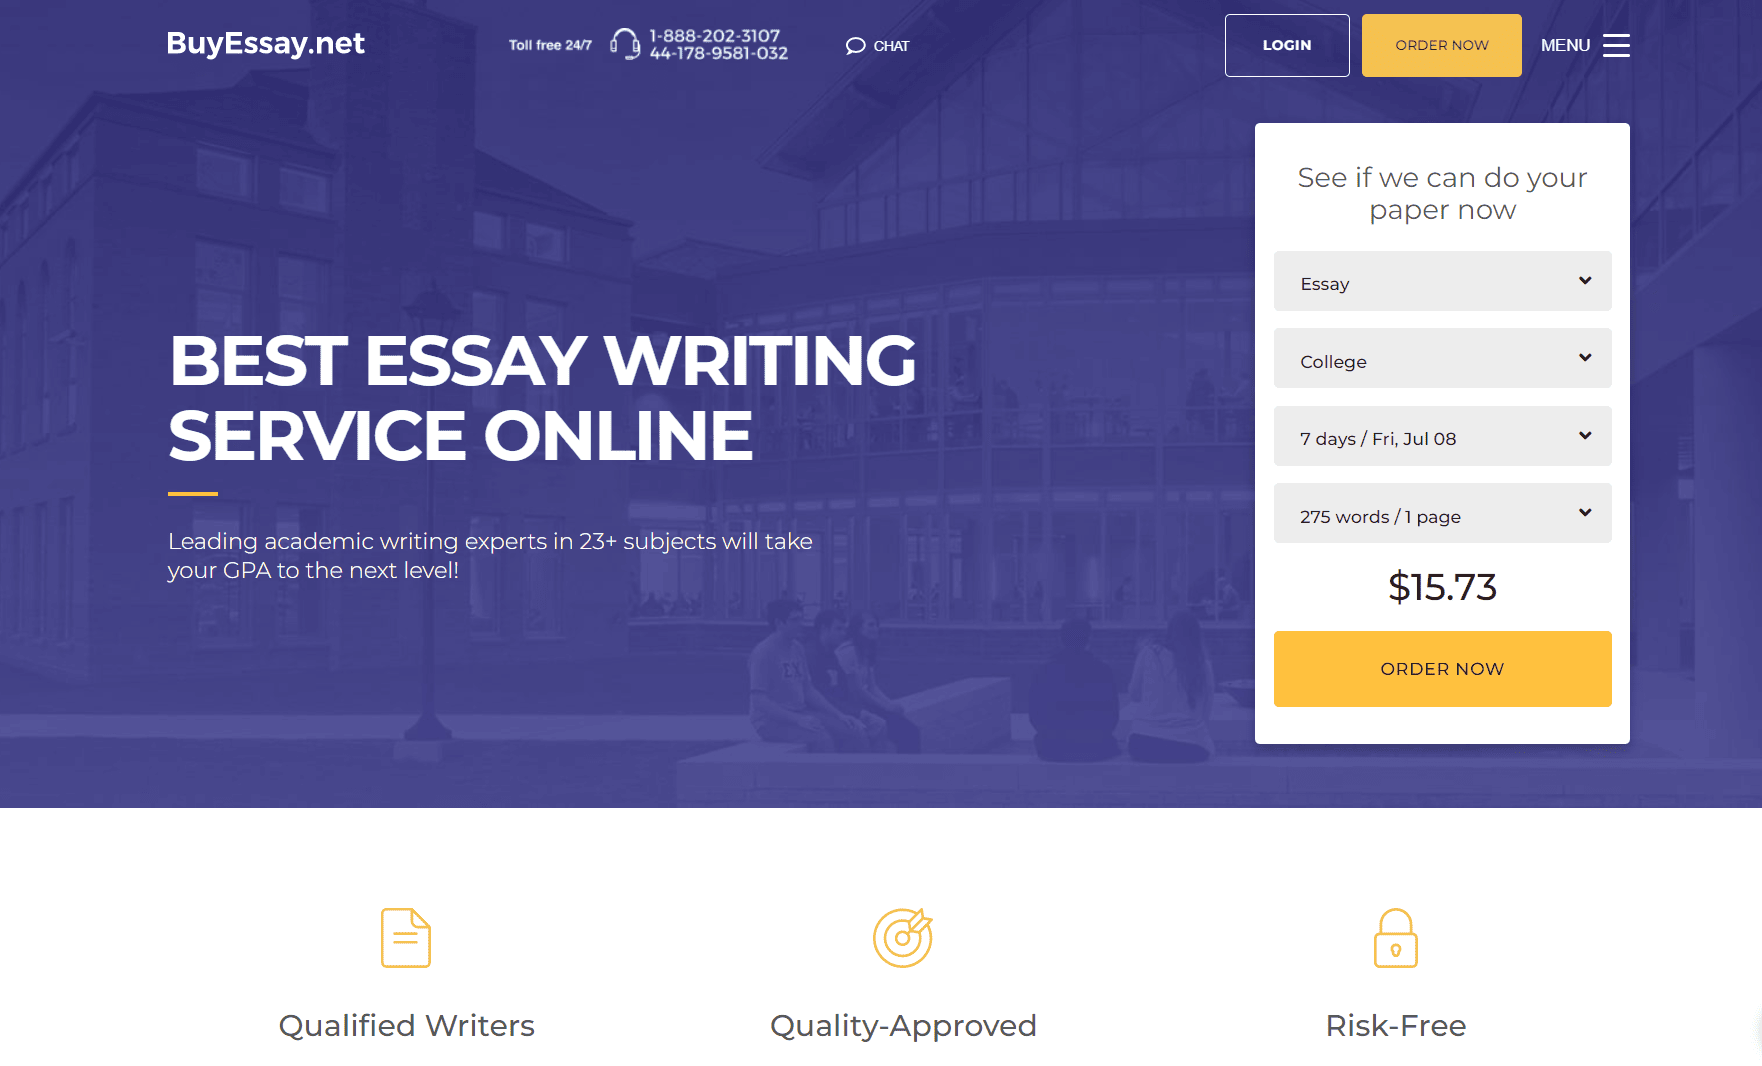 Buy Essay Service Review 2022 – Everything You Need to Know